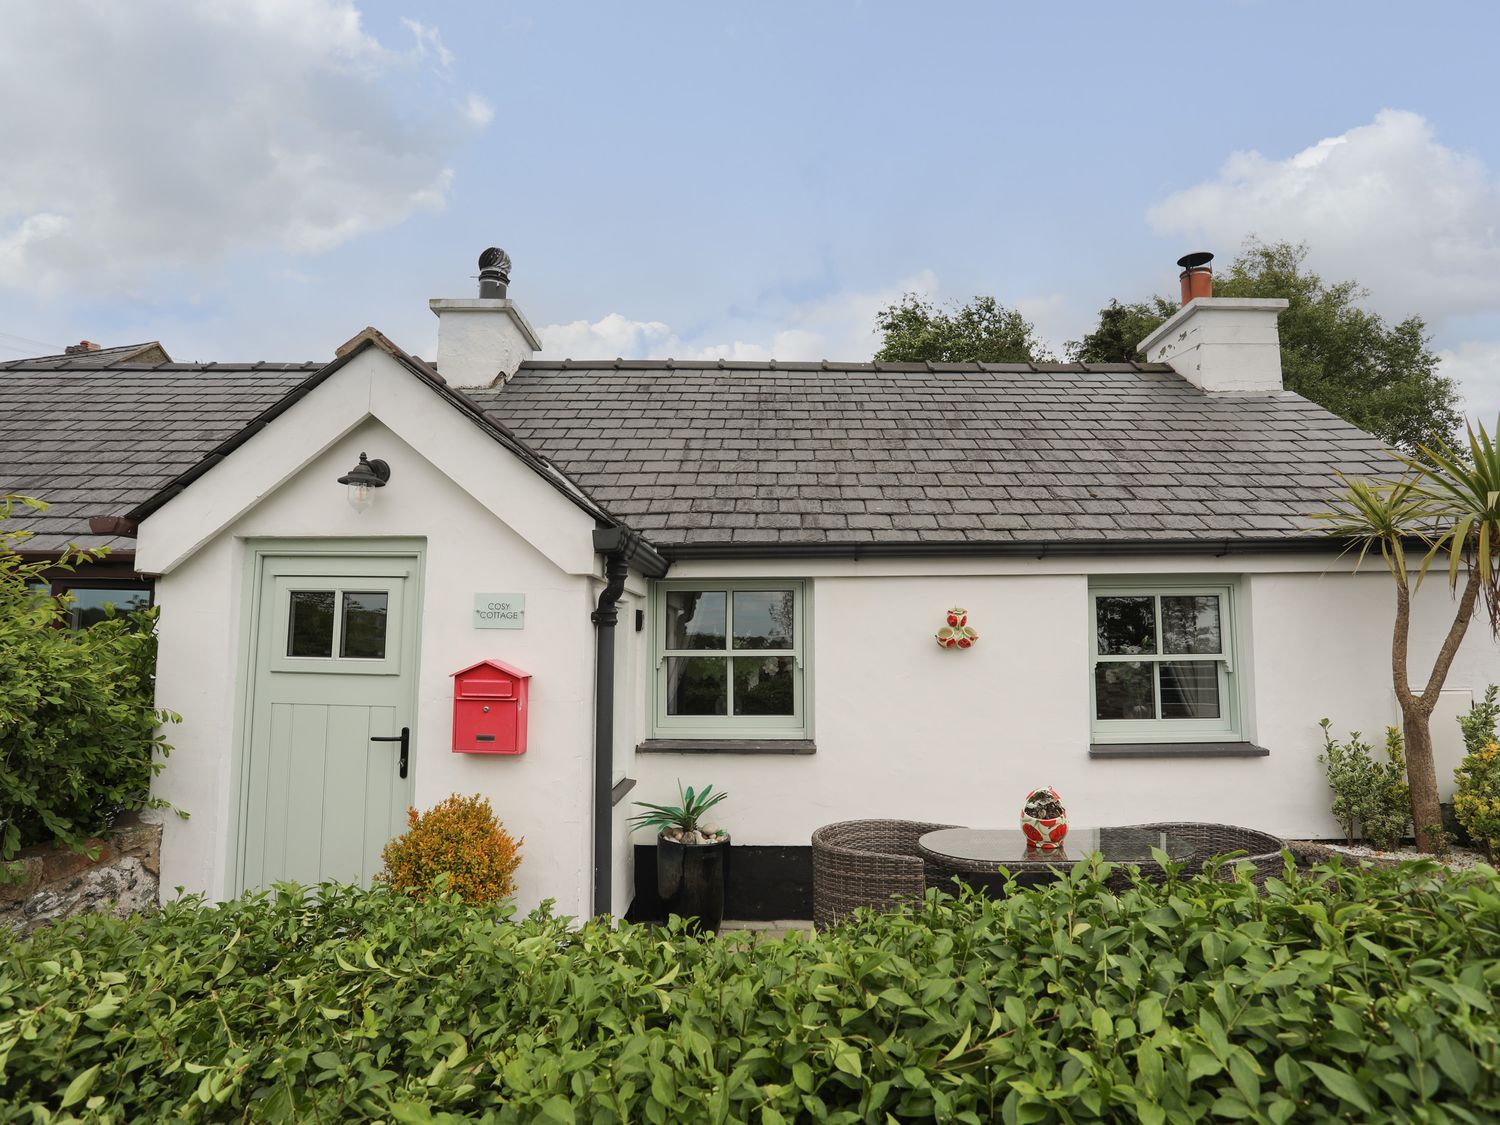 Cosy Cottage - Anglesey - 1064857 - photo 1